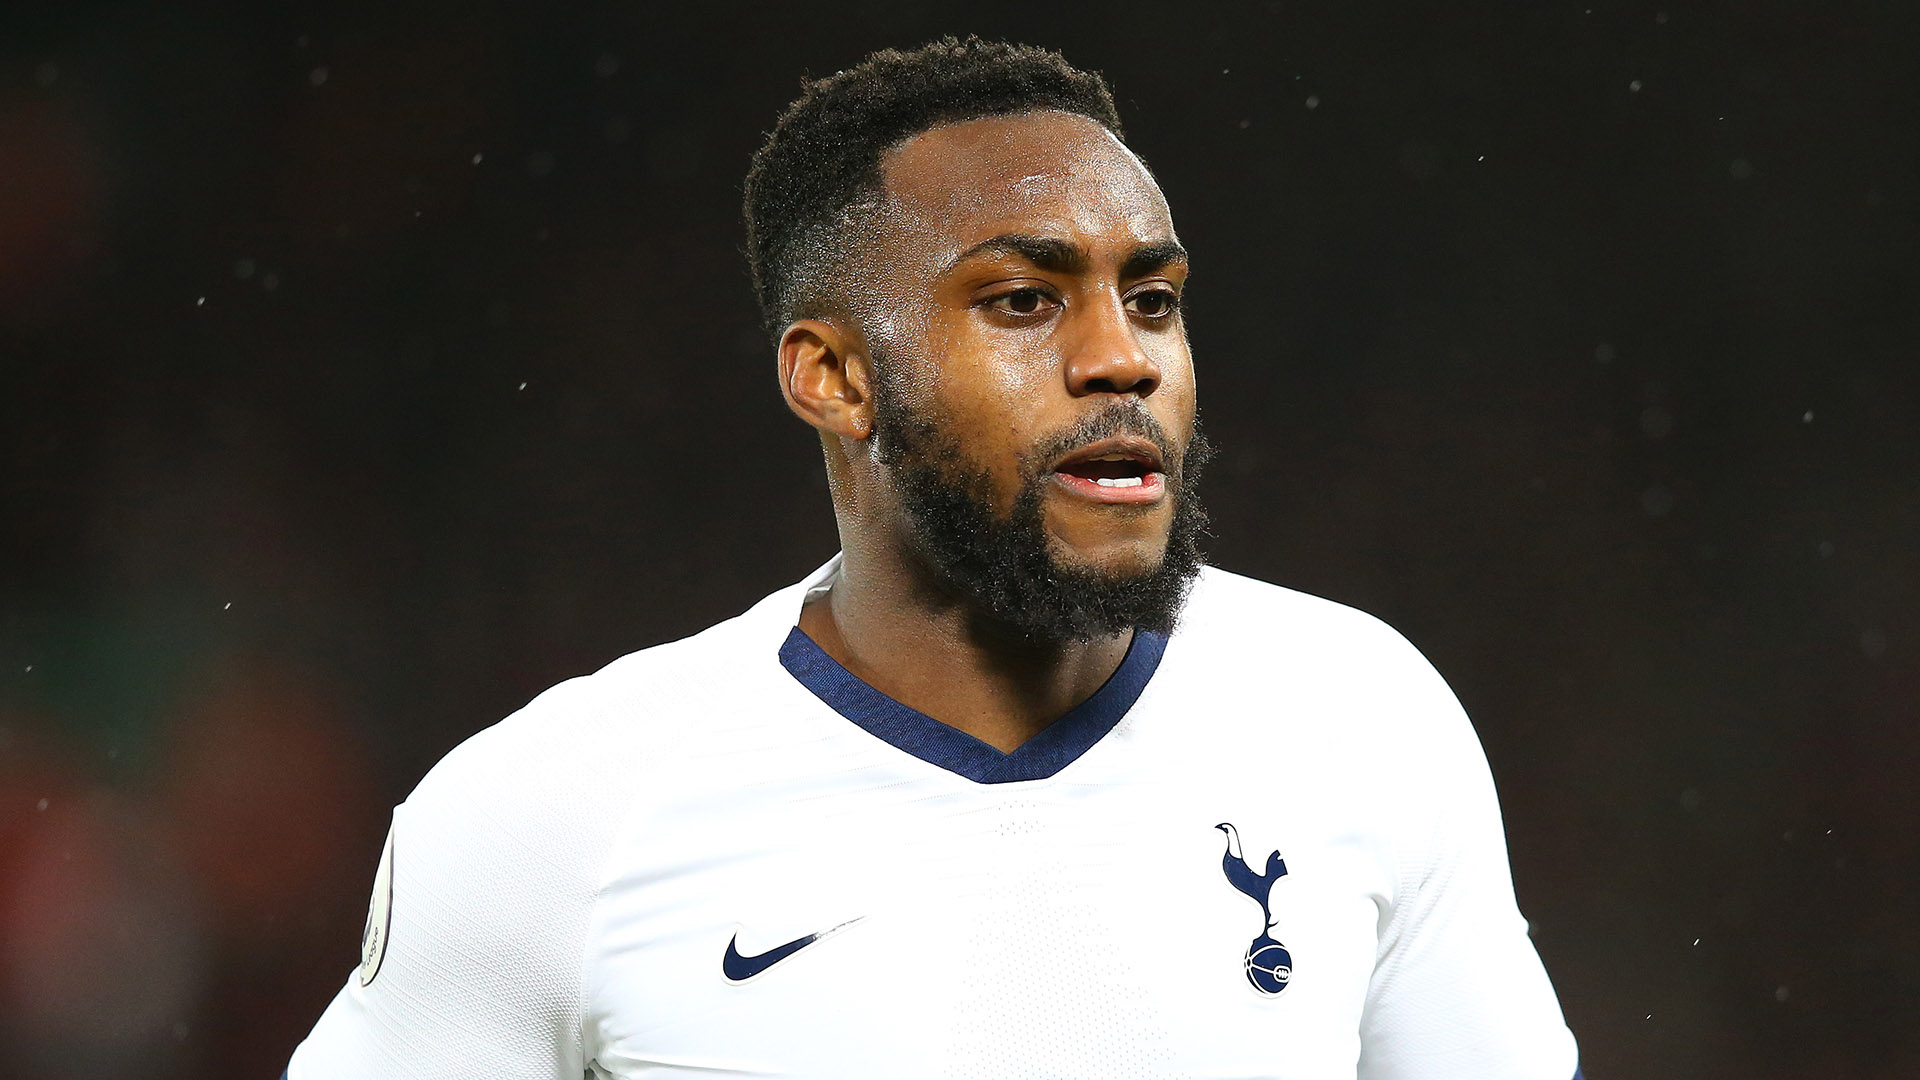 'I got stopped by the police last week' - England defender Danny Rose says suffering racism is 'everyday life'